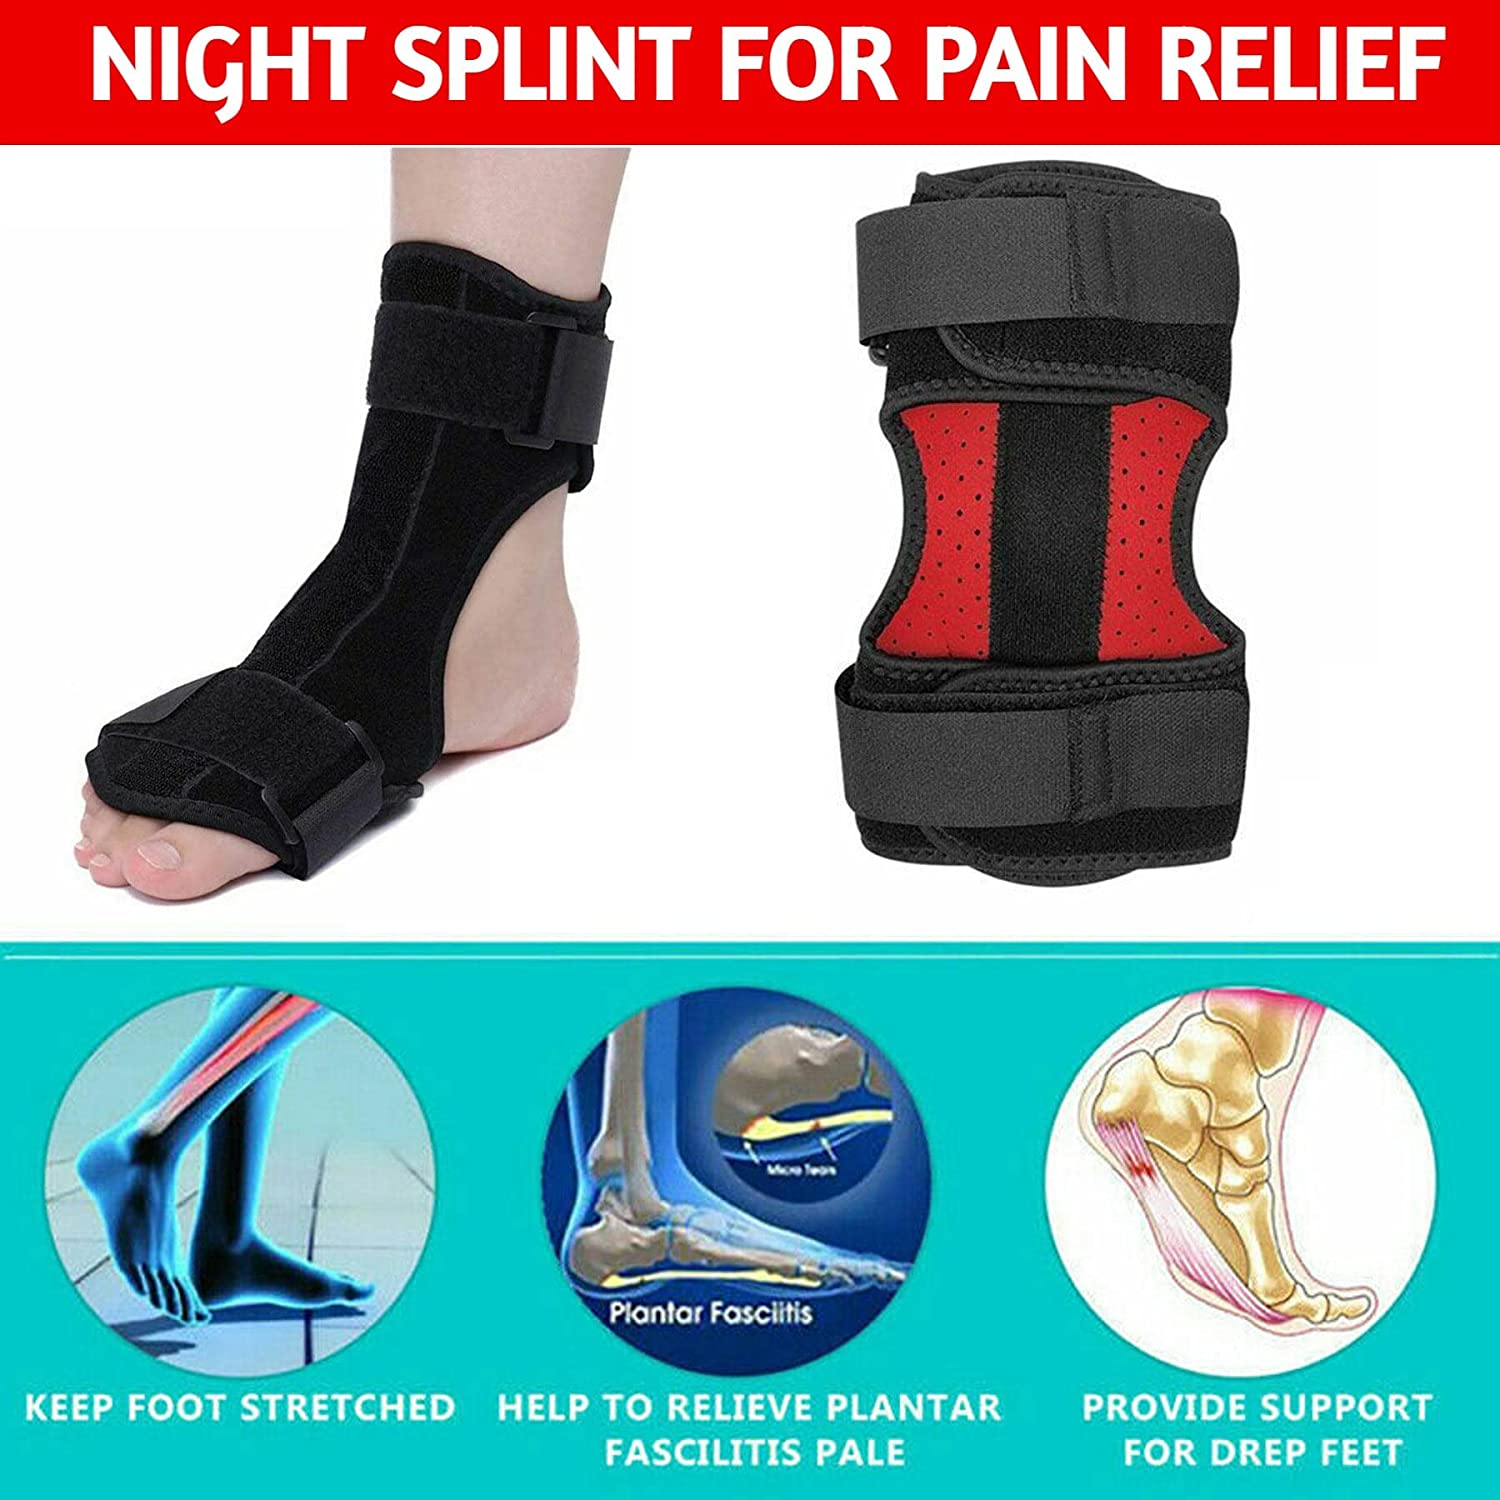 NUCARTURE Plantar Fasciitis Night Splint for Heel Pain Relief - Foot Drop Orthotic Brace for Sleep Support, Fits for Both Left and Right Foot